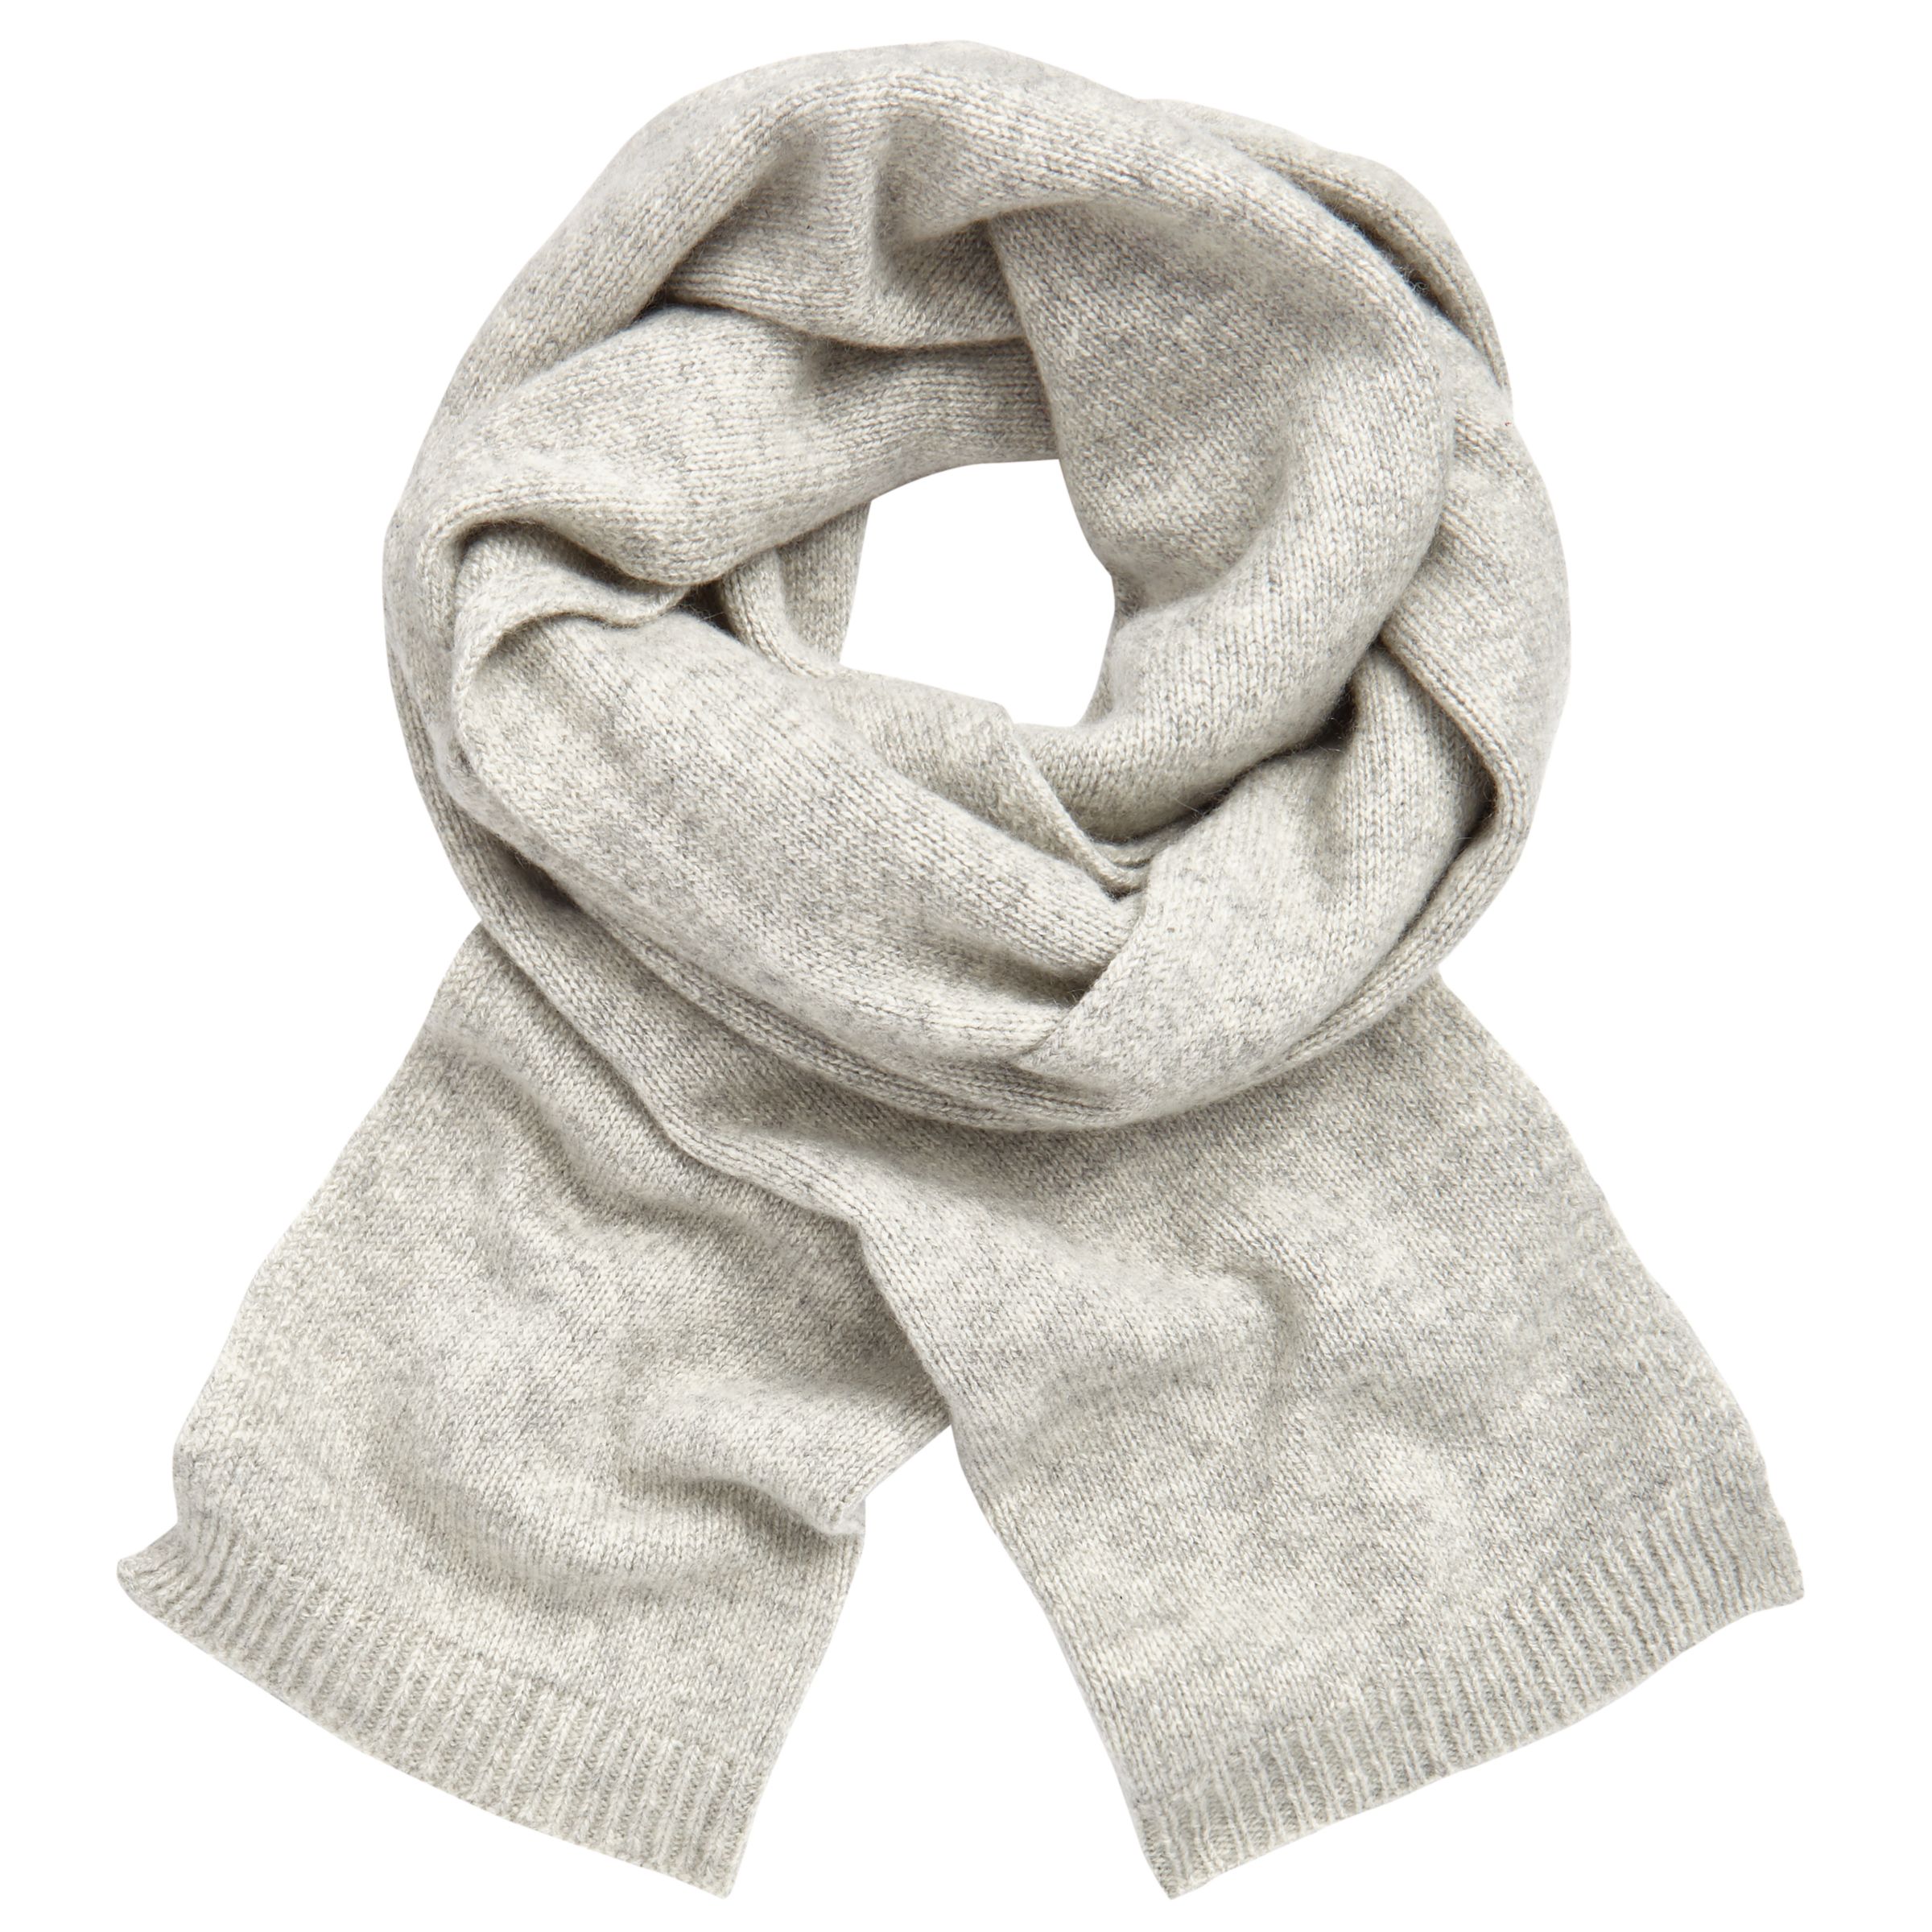 where can i buy a cashmere scarf